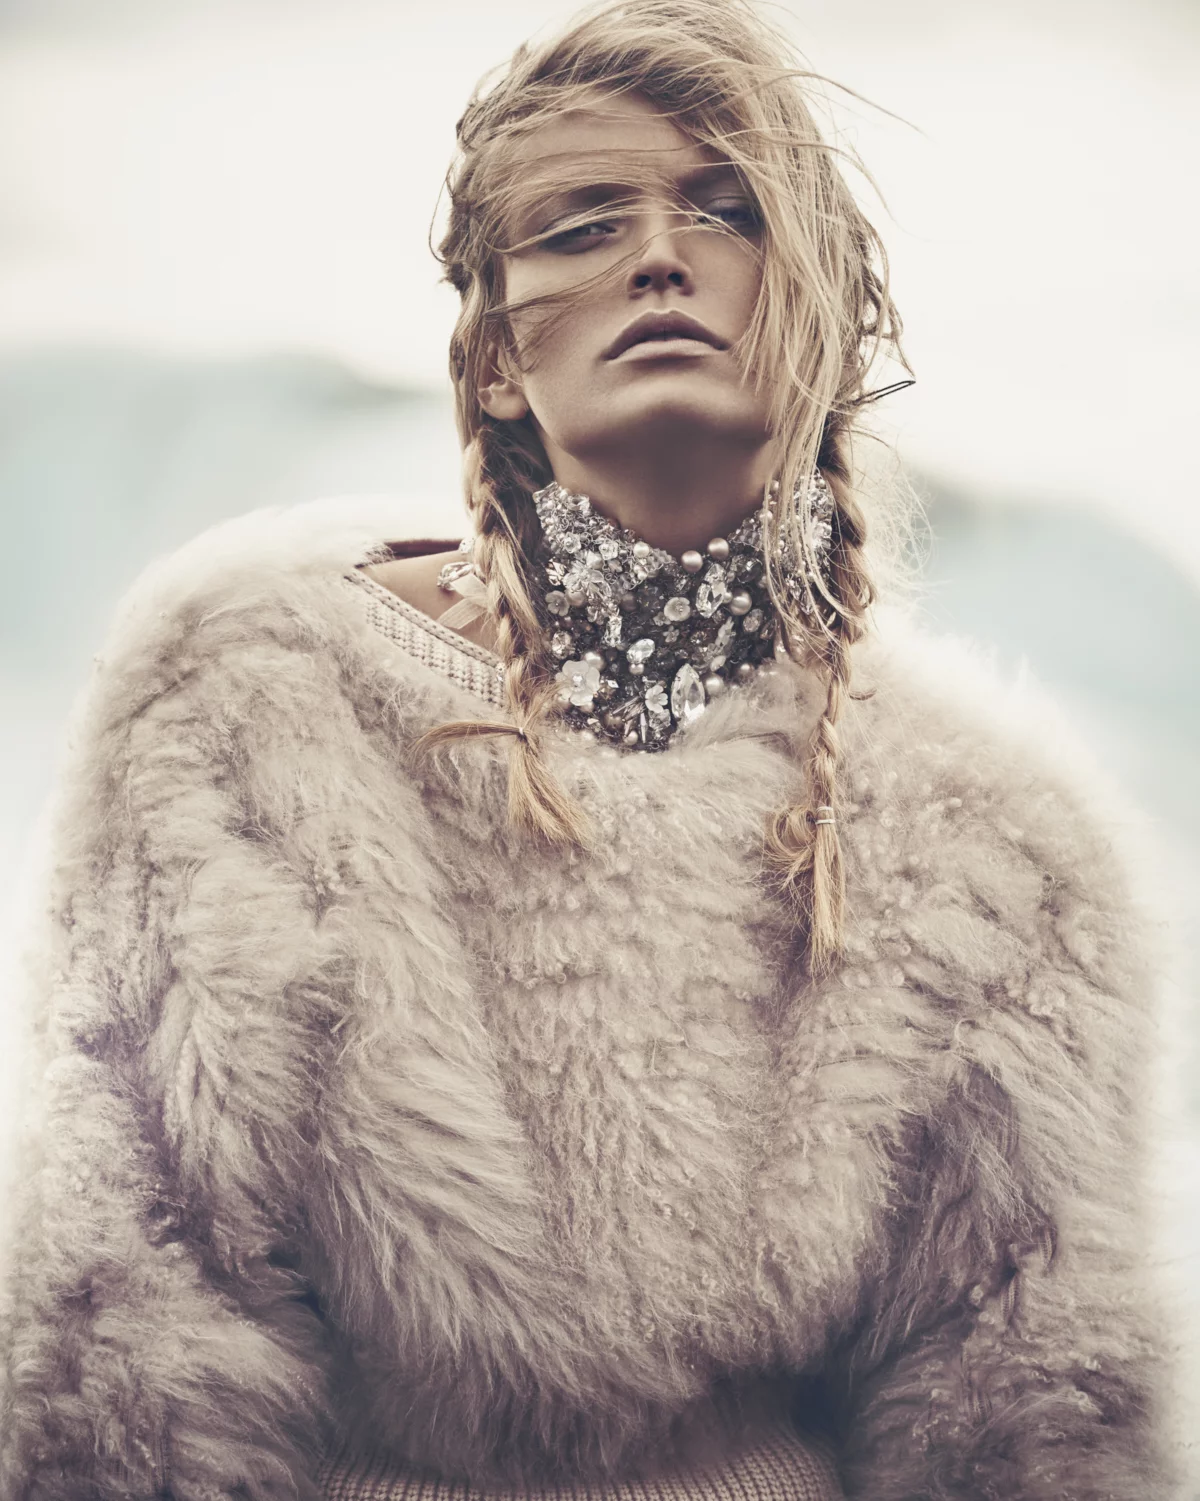 Vogue Spain 2 by Andreas ORTNER